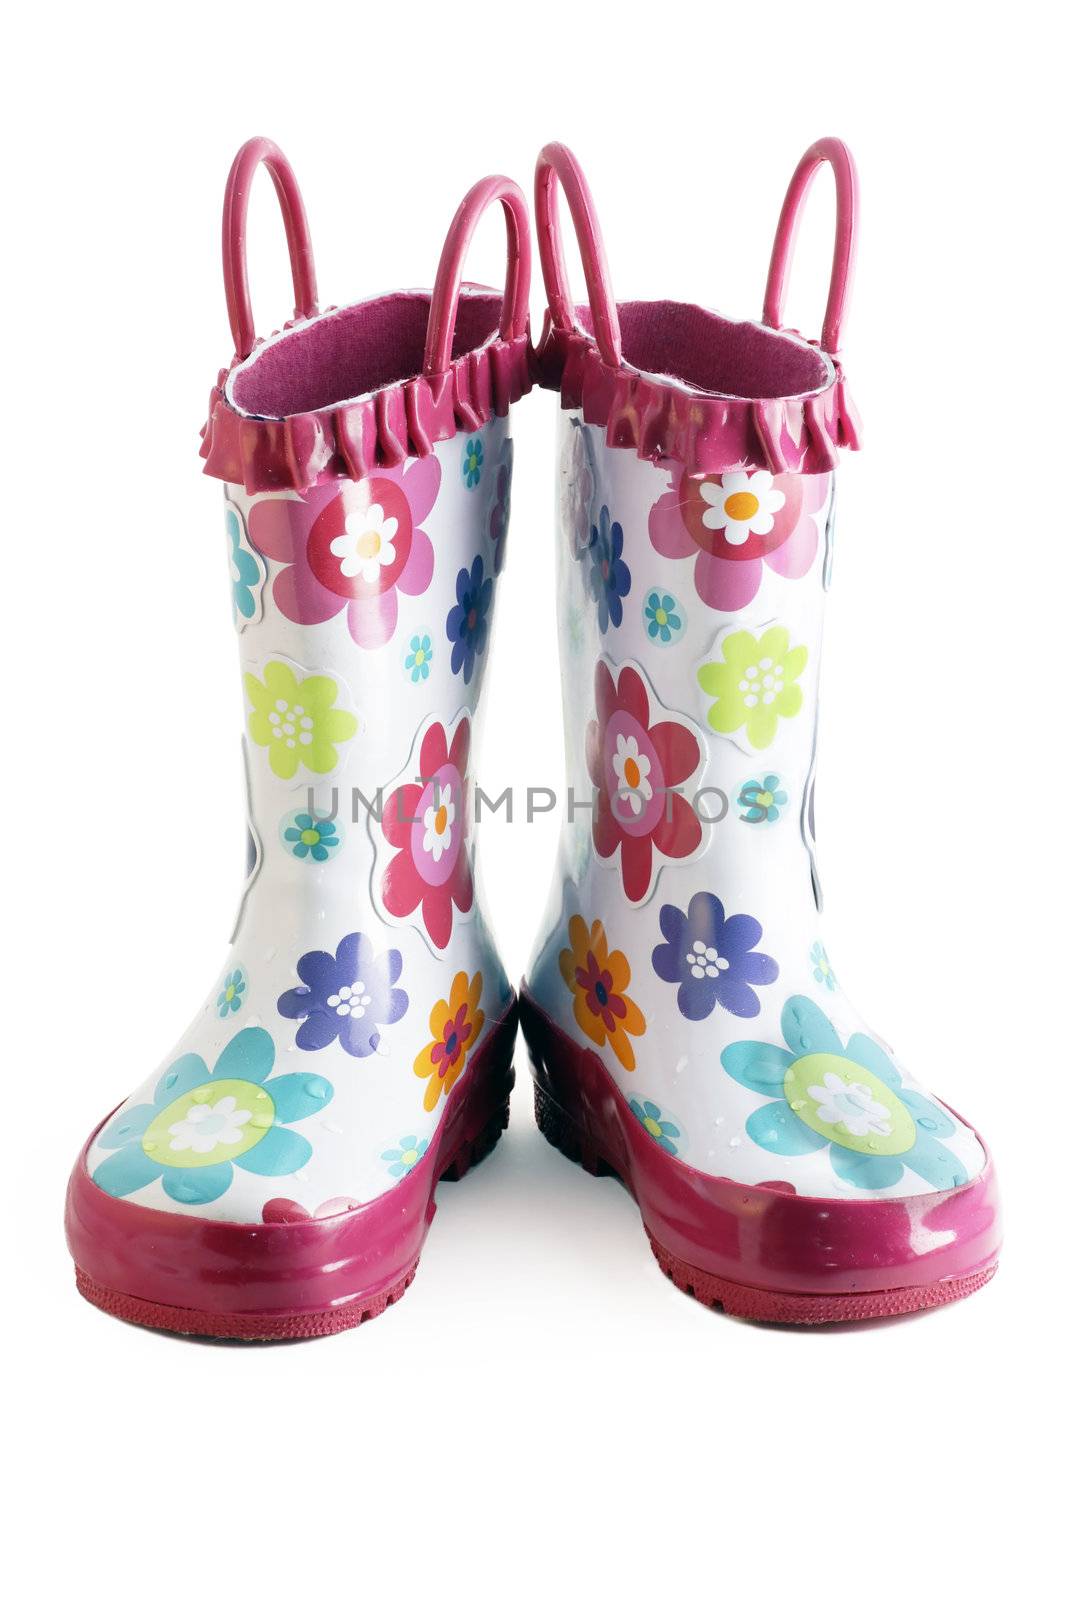 Pair of little girl's fun rain boots galoshes with water droplets on them